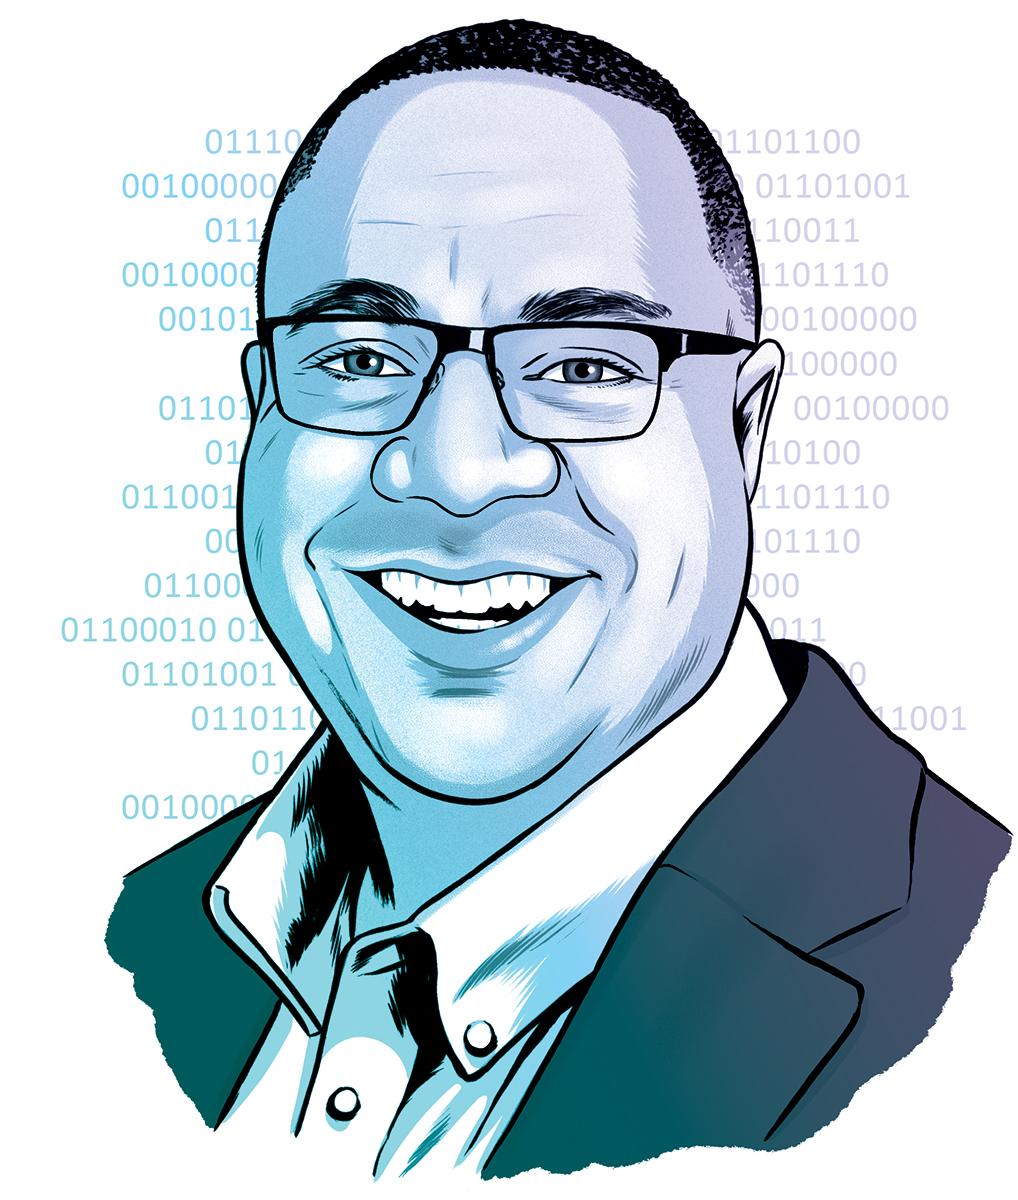 Illustrated portrait of David Neal with ones and zeros in the background